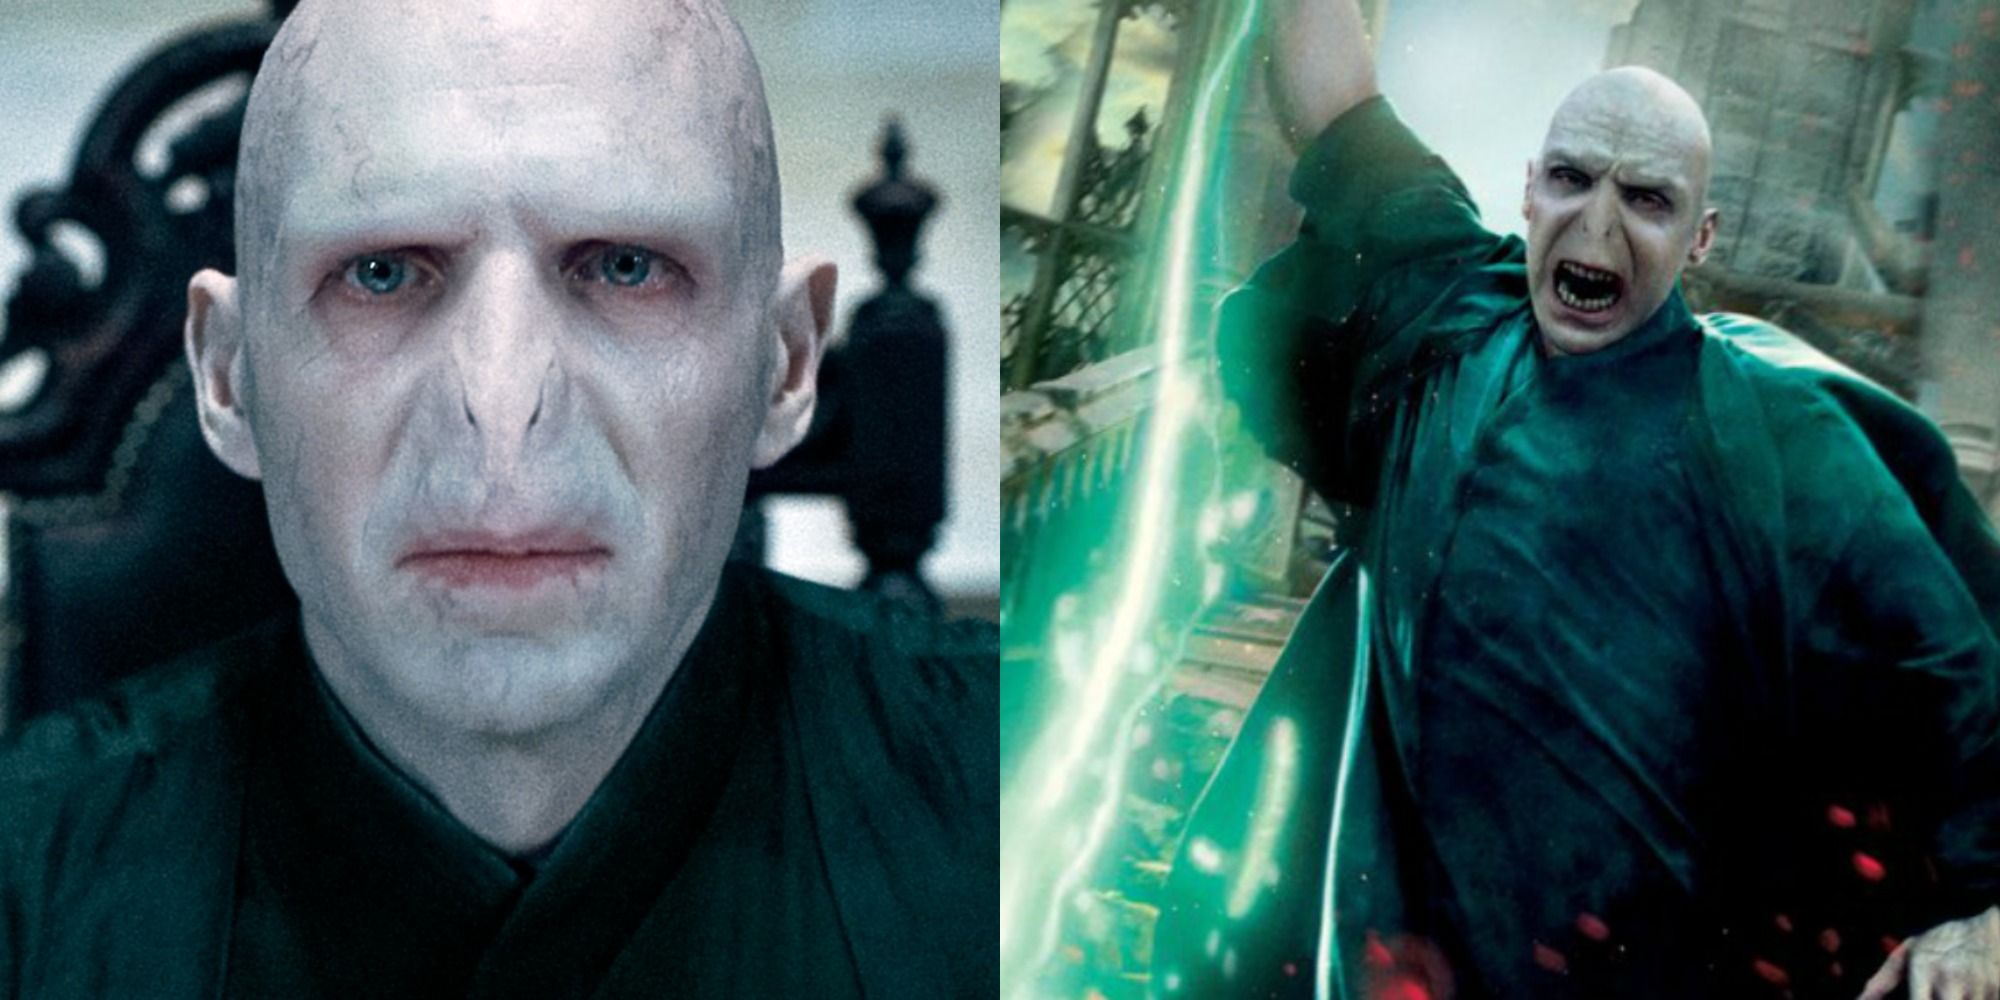 Split image showing a close-up of Voldemort and him casting the killing curse